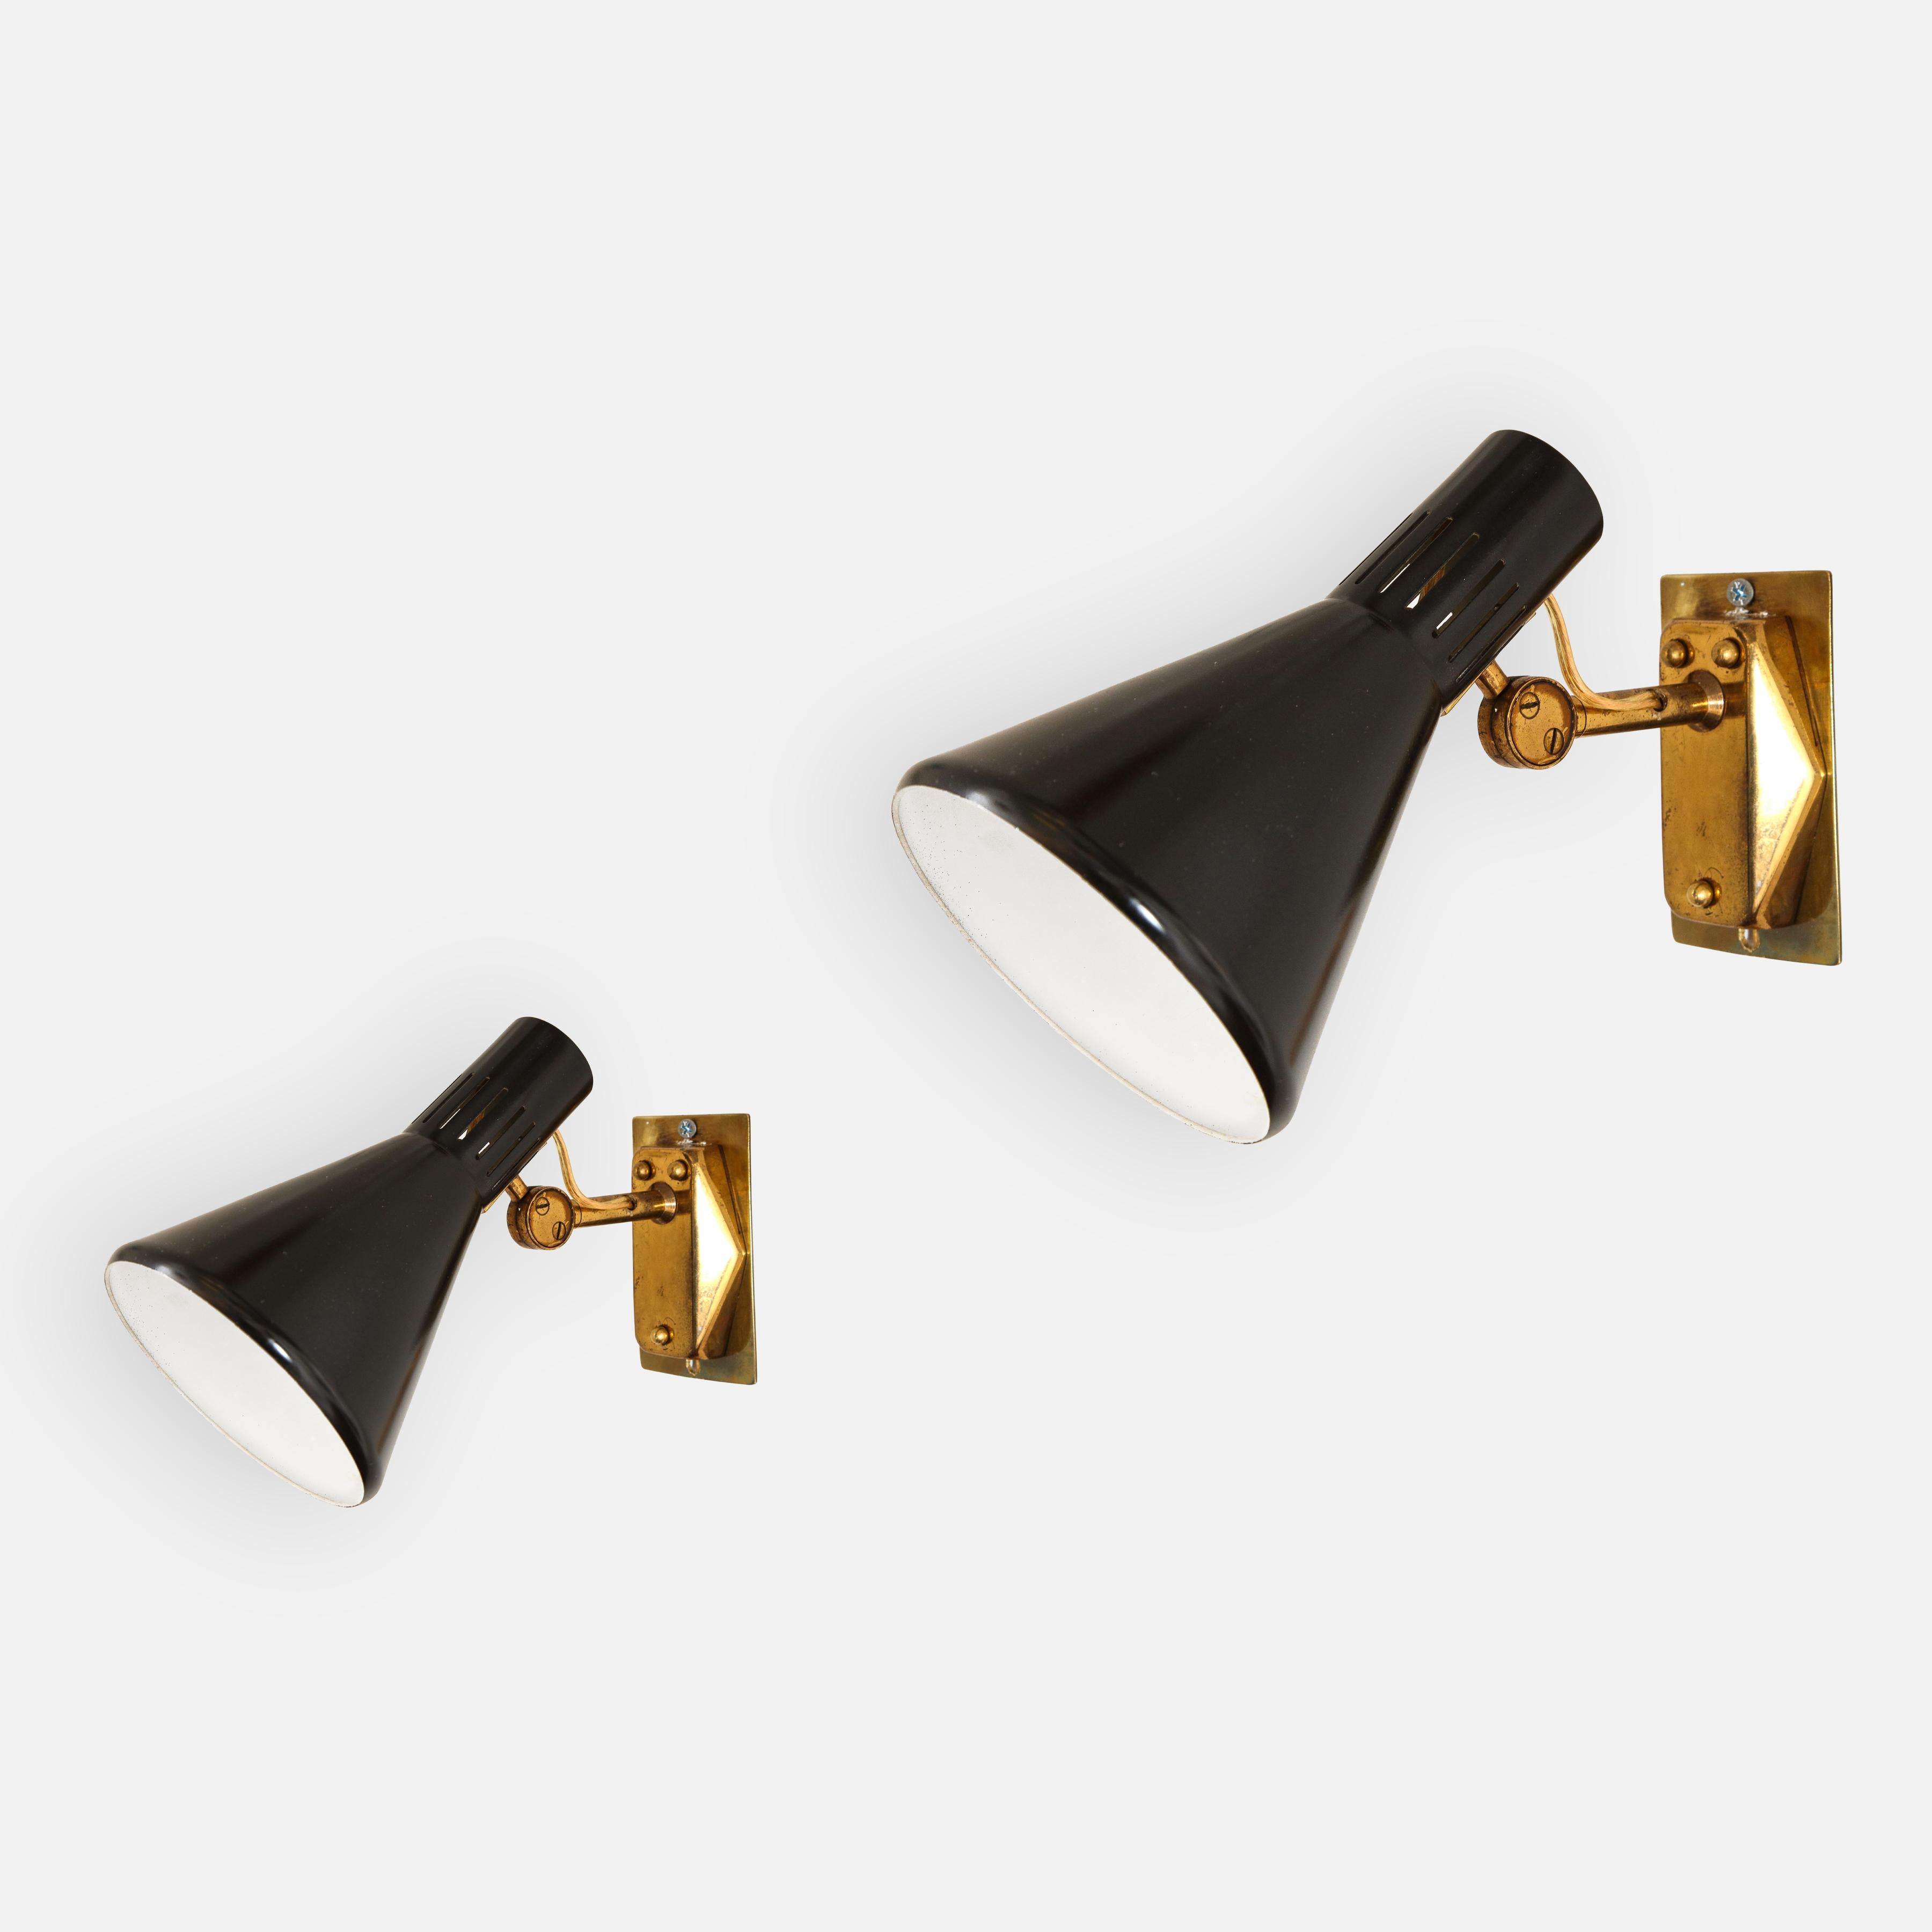 Stilnovo set of six articulating sconces model 2085 with black lacquered perforated metal shades which pivot vertically on brass arms attached to original backplates. Retains original manufacturers label marked STILNOVO. Recently restored and